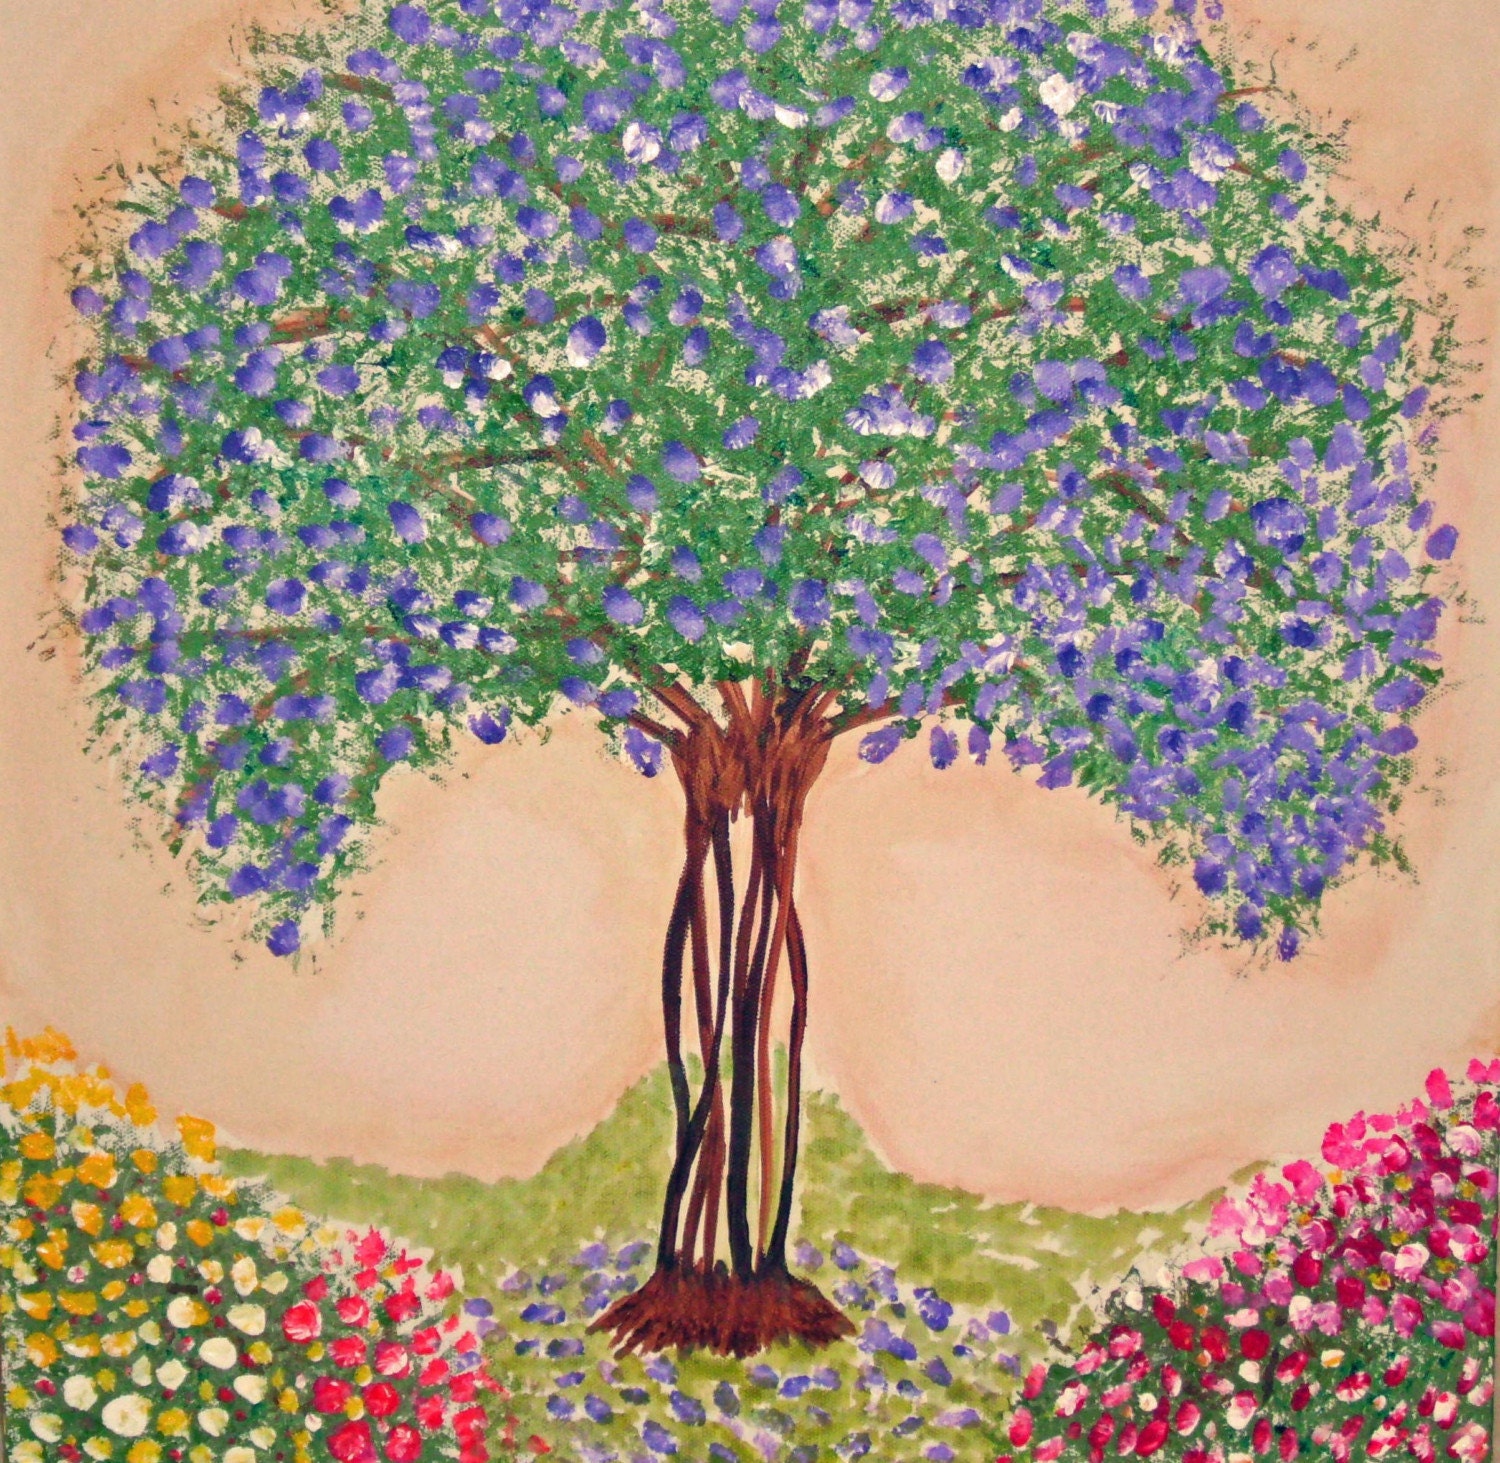 Weekend Sale Original Painting on Canvas 18x18 Whimsical Crape Myrtle Blossom Tree